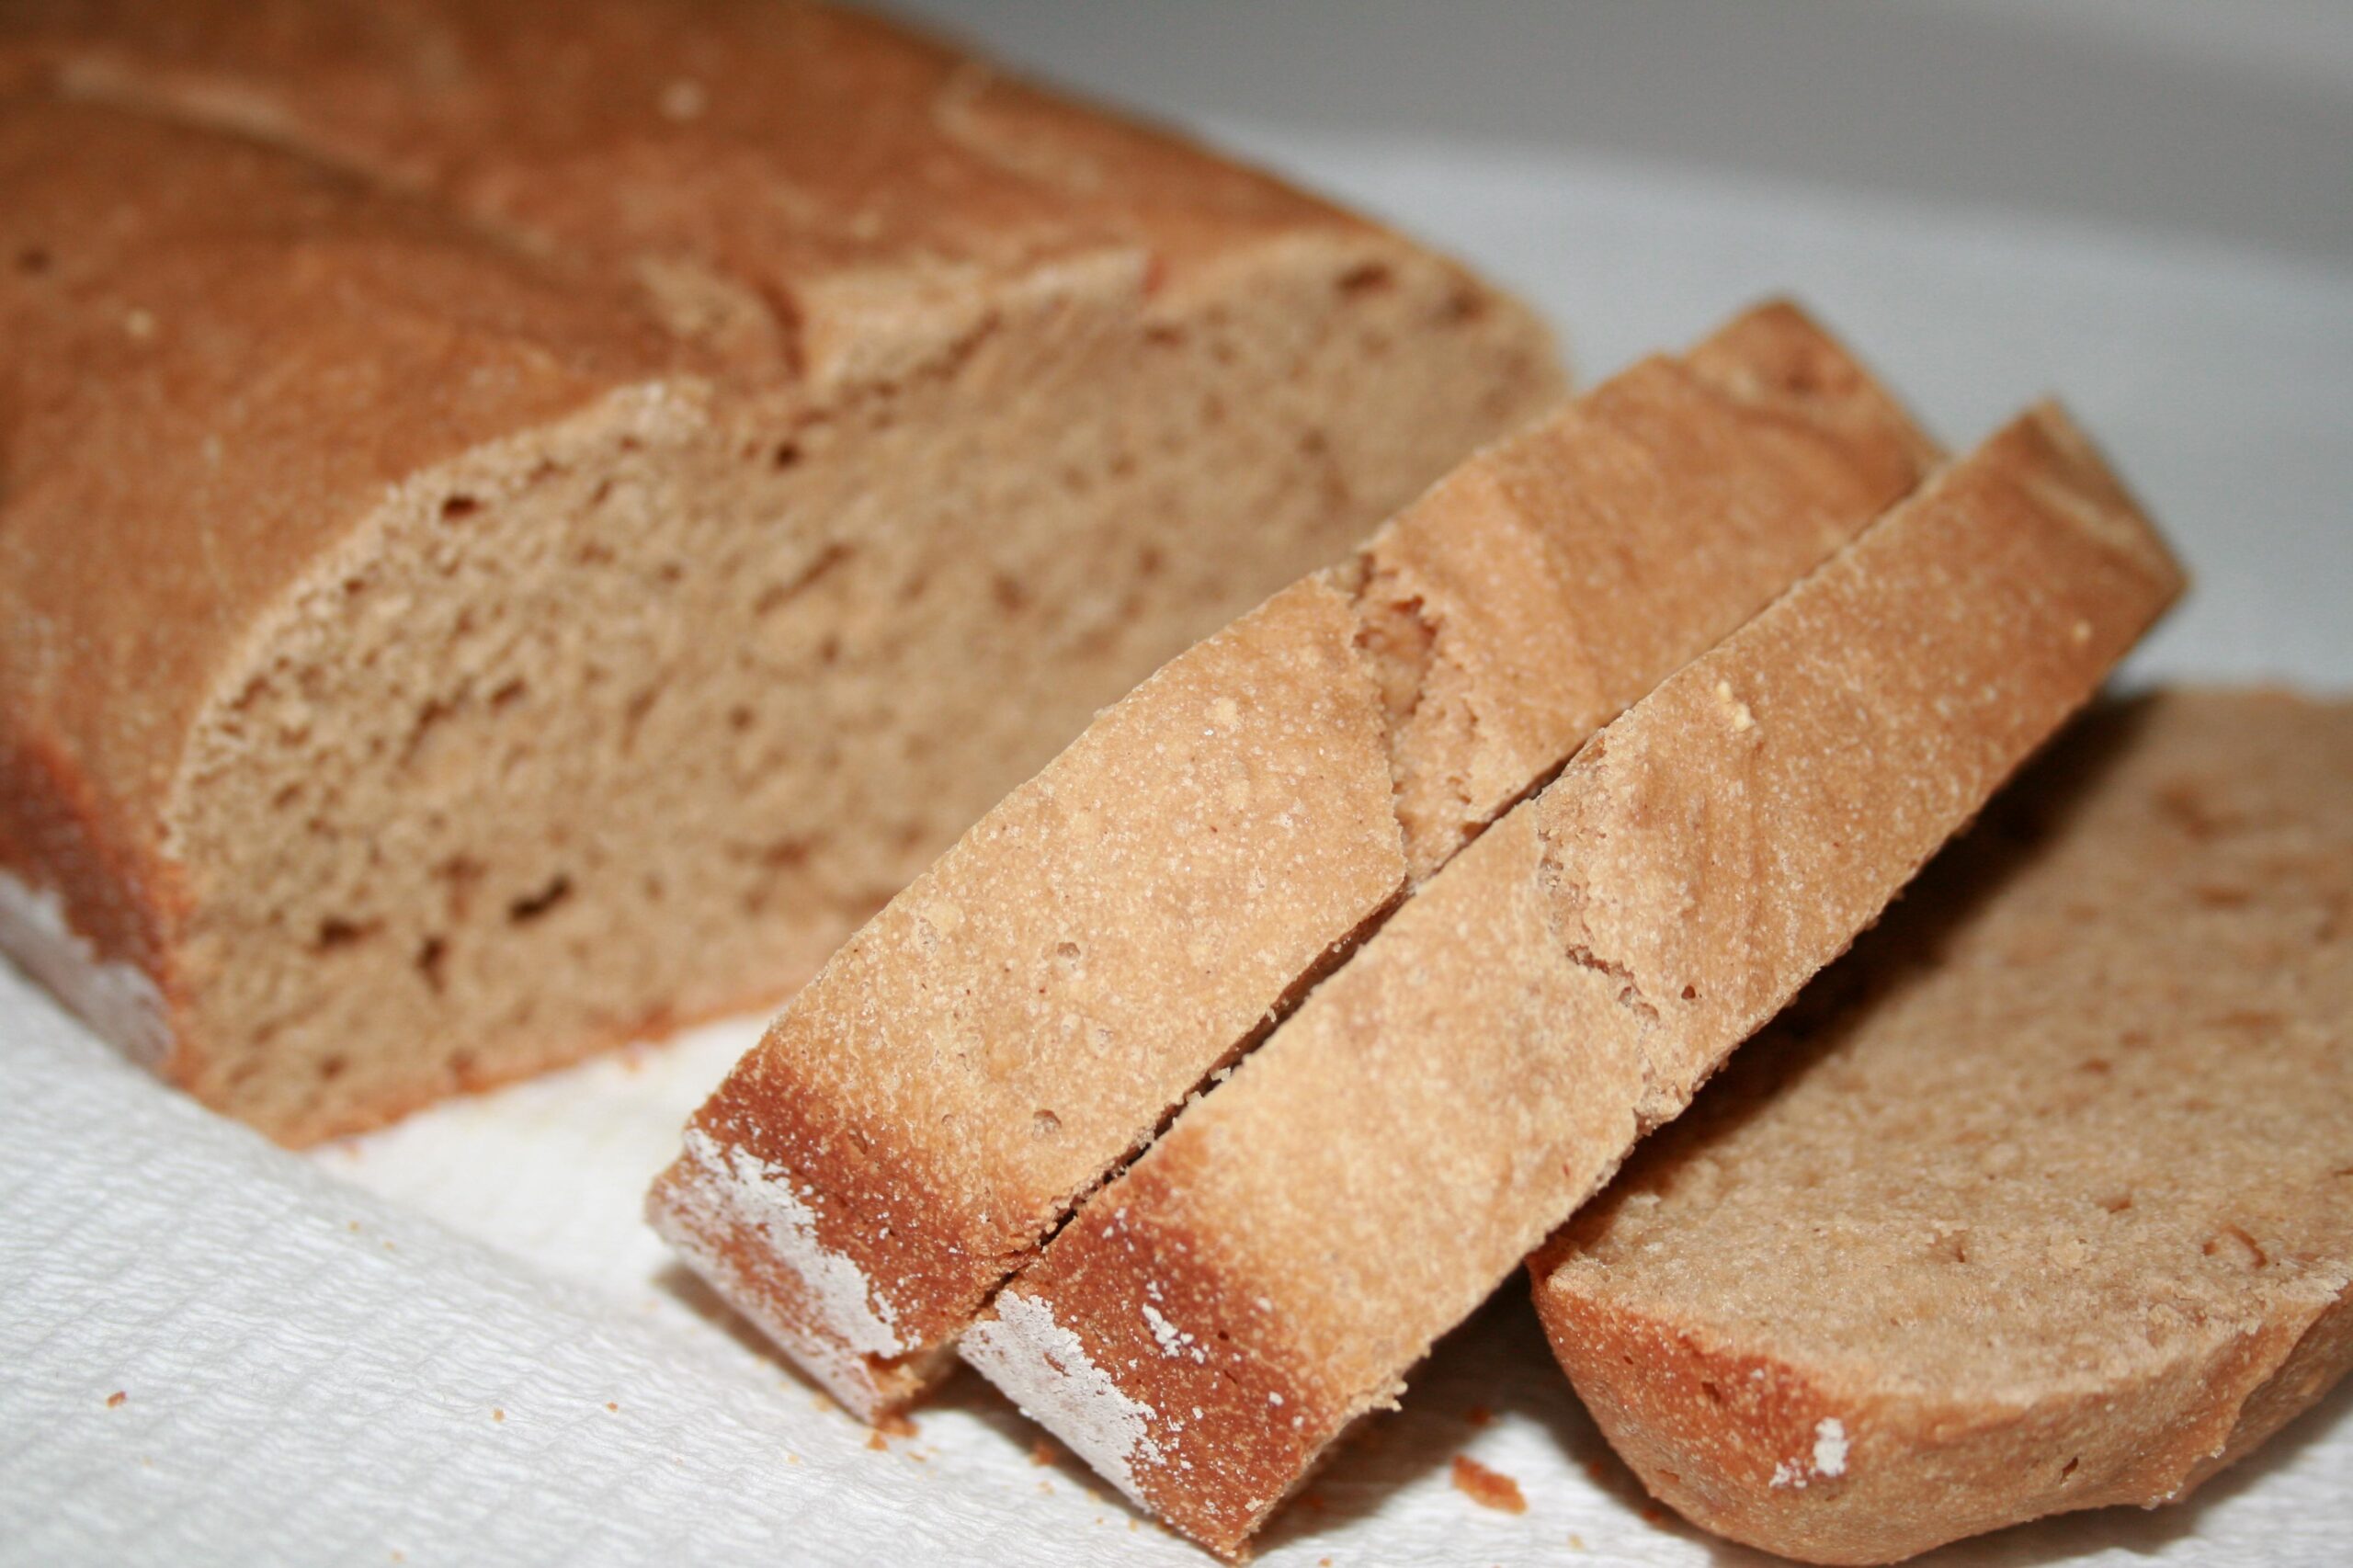  Sink your teeth into this delicious gluten-free bread